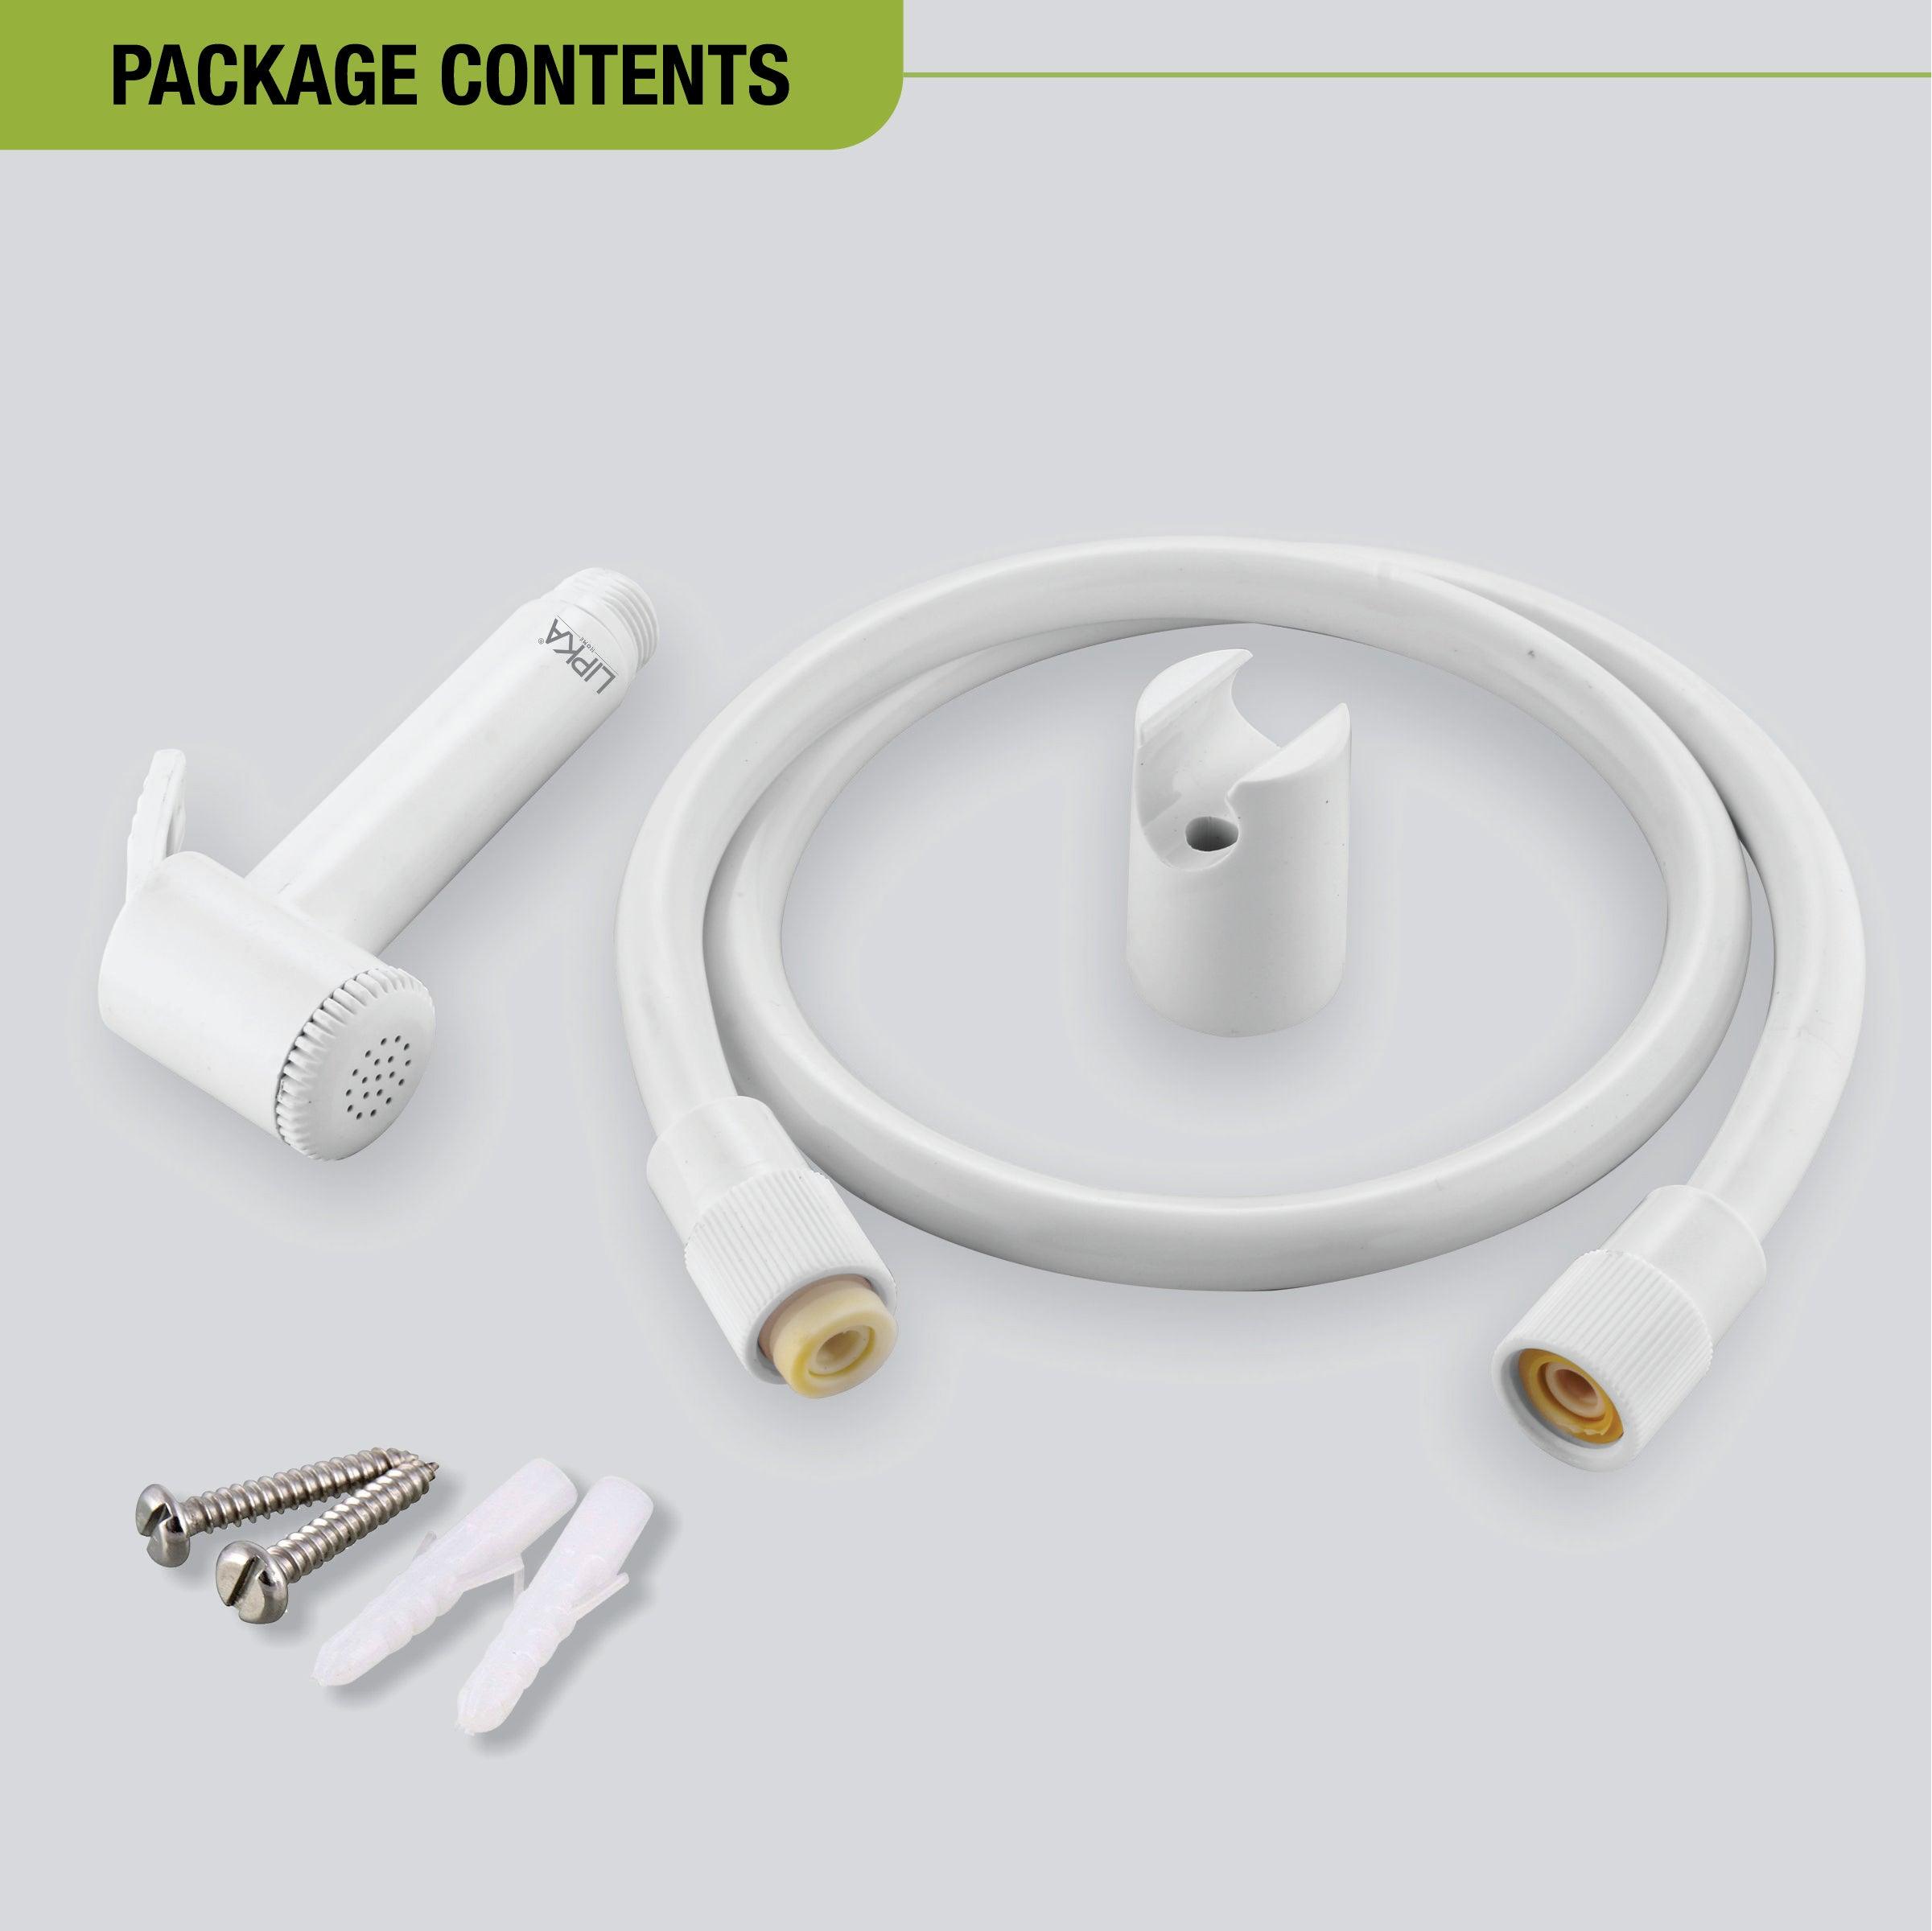 SAM White Health Faucet (Complete Set) package includes